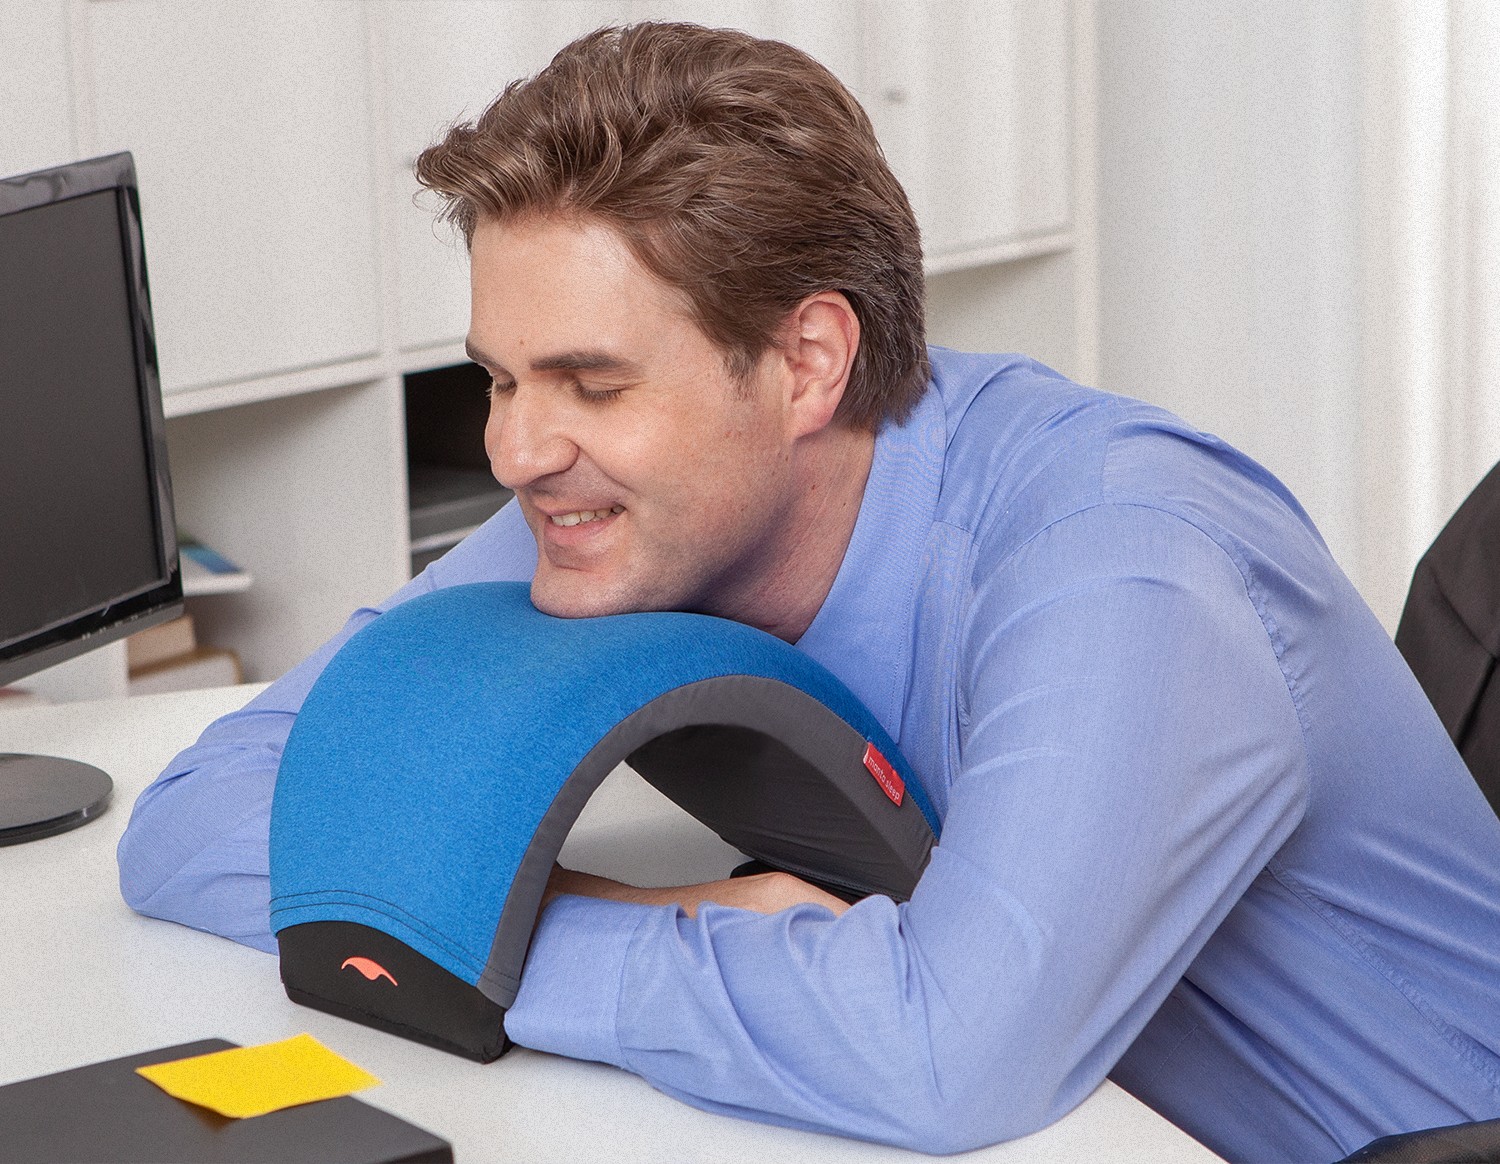 A man resting his chin on a nap pillow while taking a healthy daily nap.